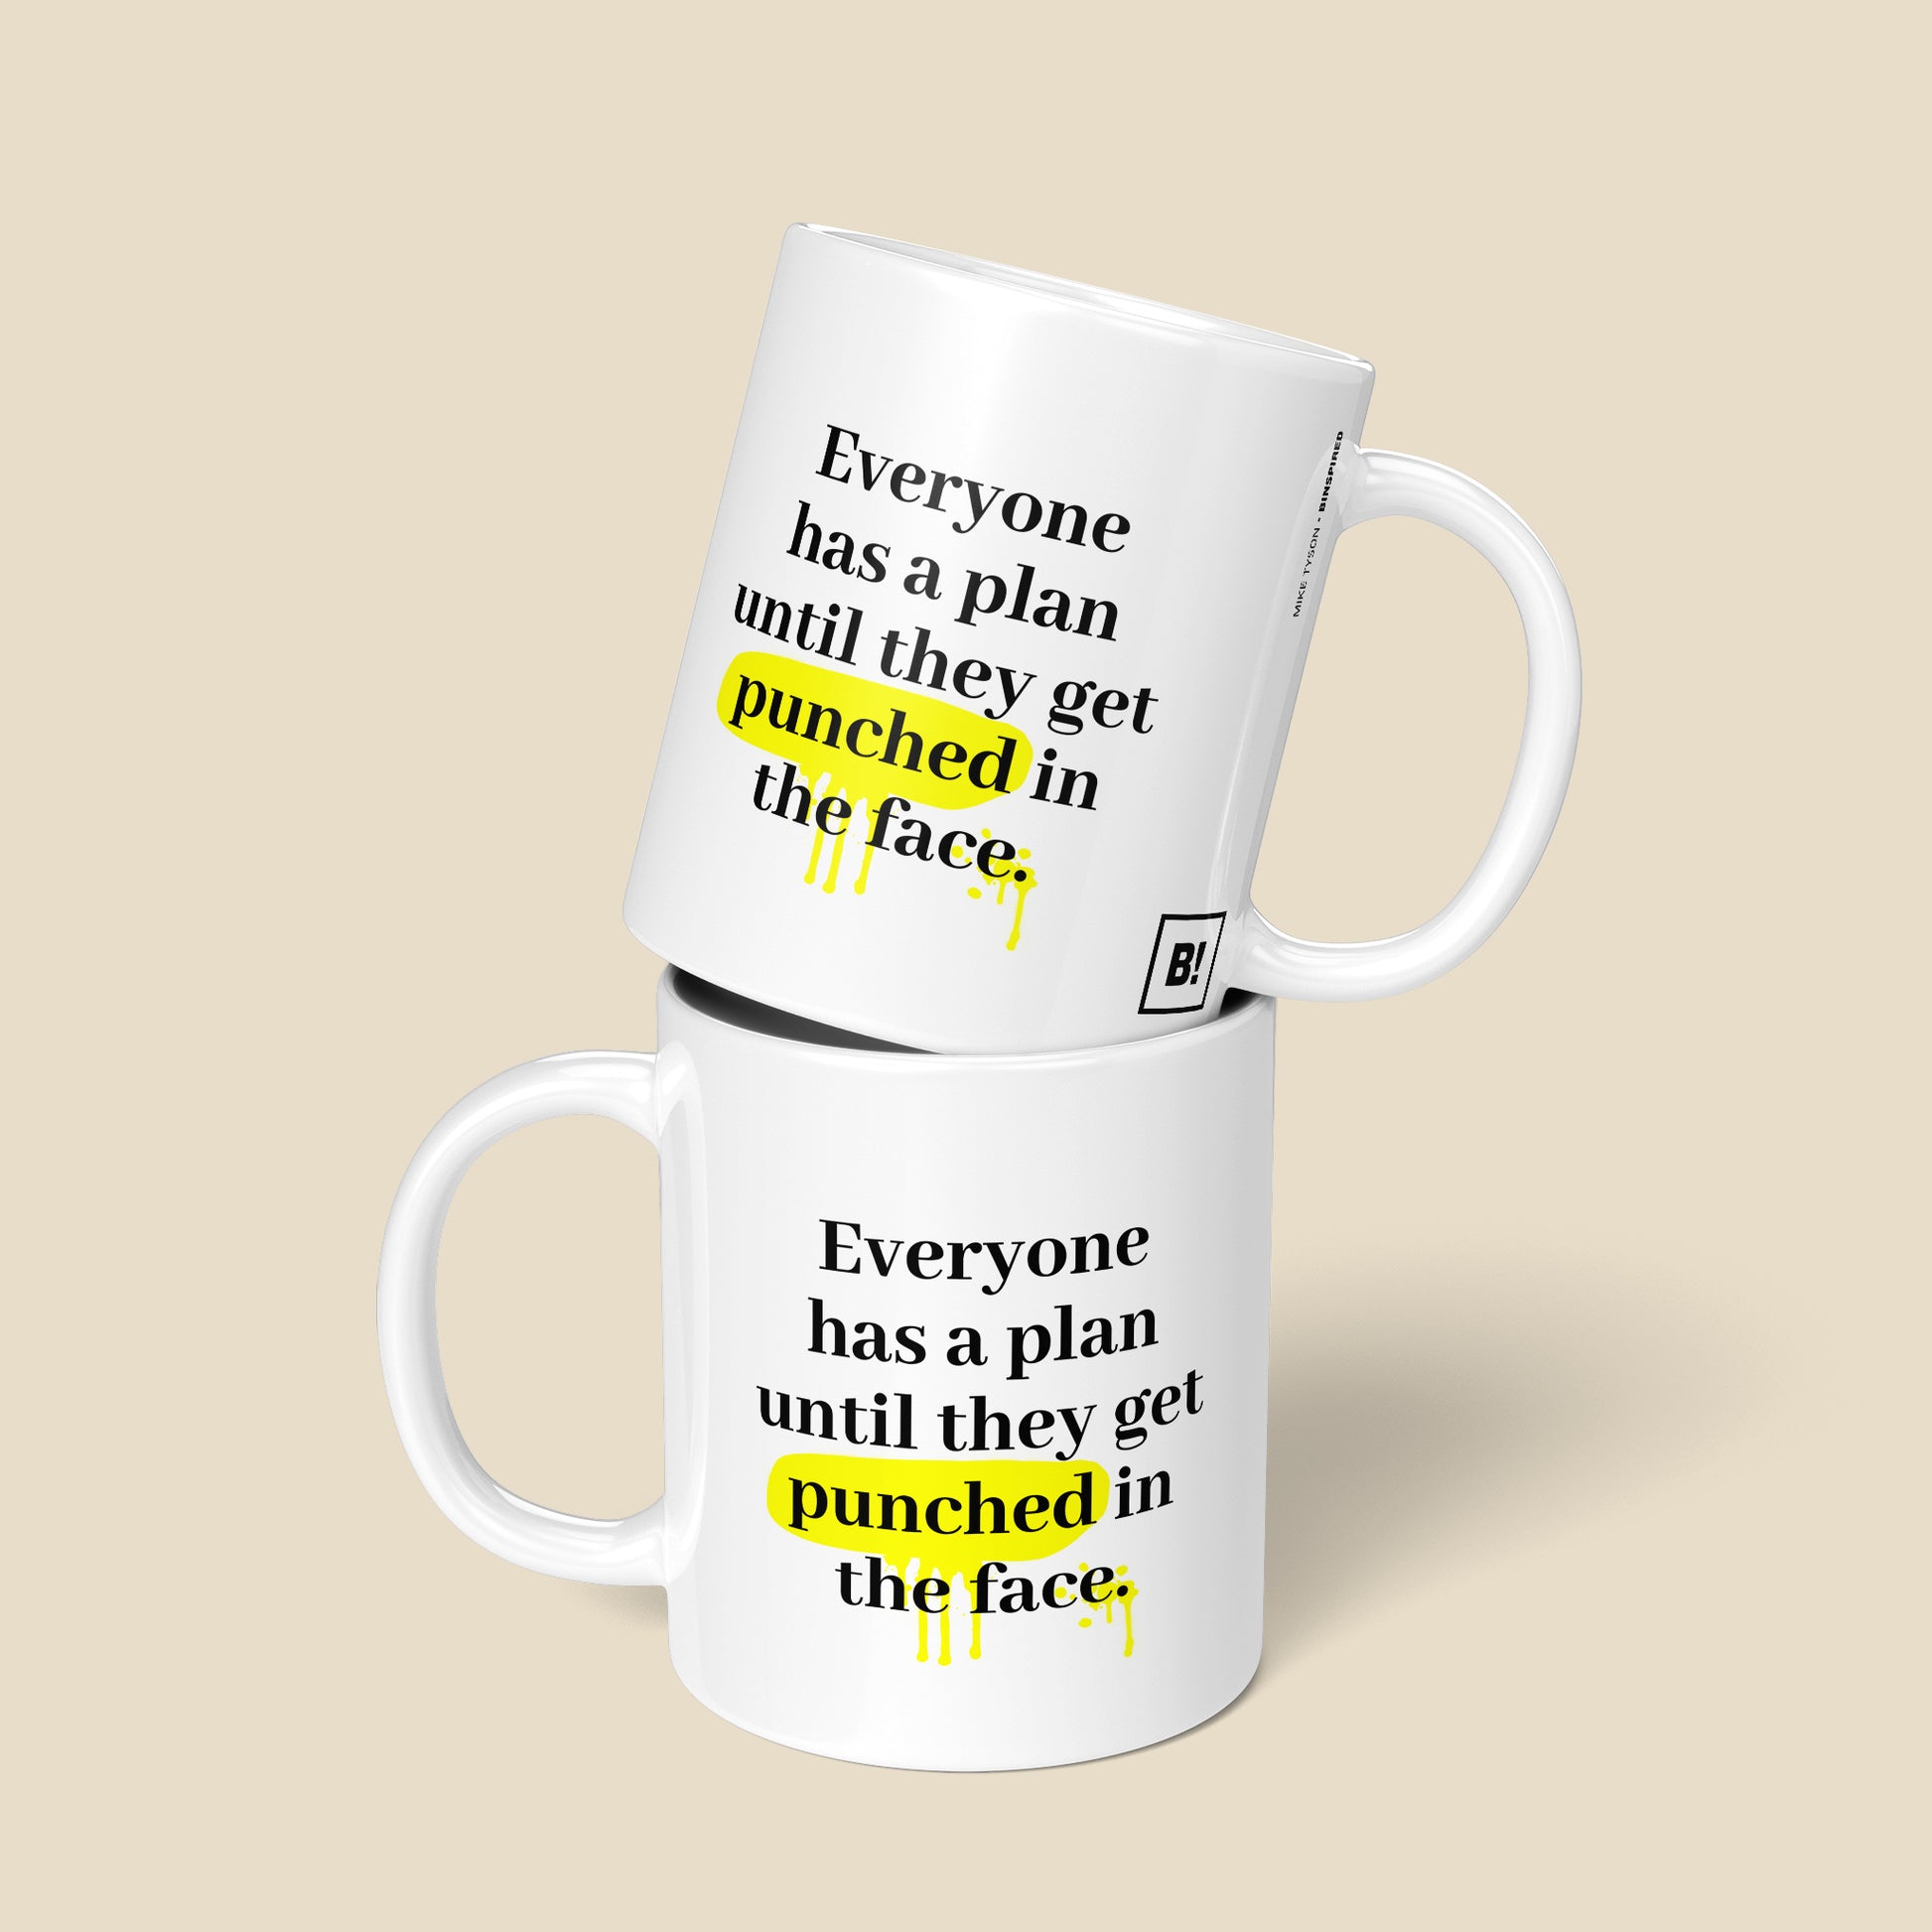 Be inspired by Mike Tyson's famous quote, "Everyone has a plan until they get punched in the face" on this 11oz white glossy coffee mug with a front and back view.